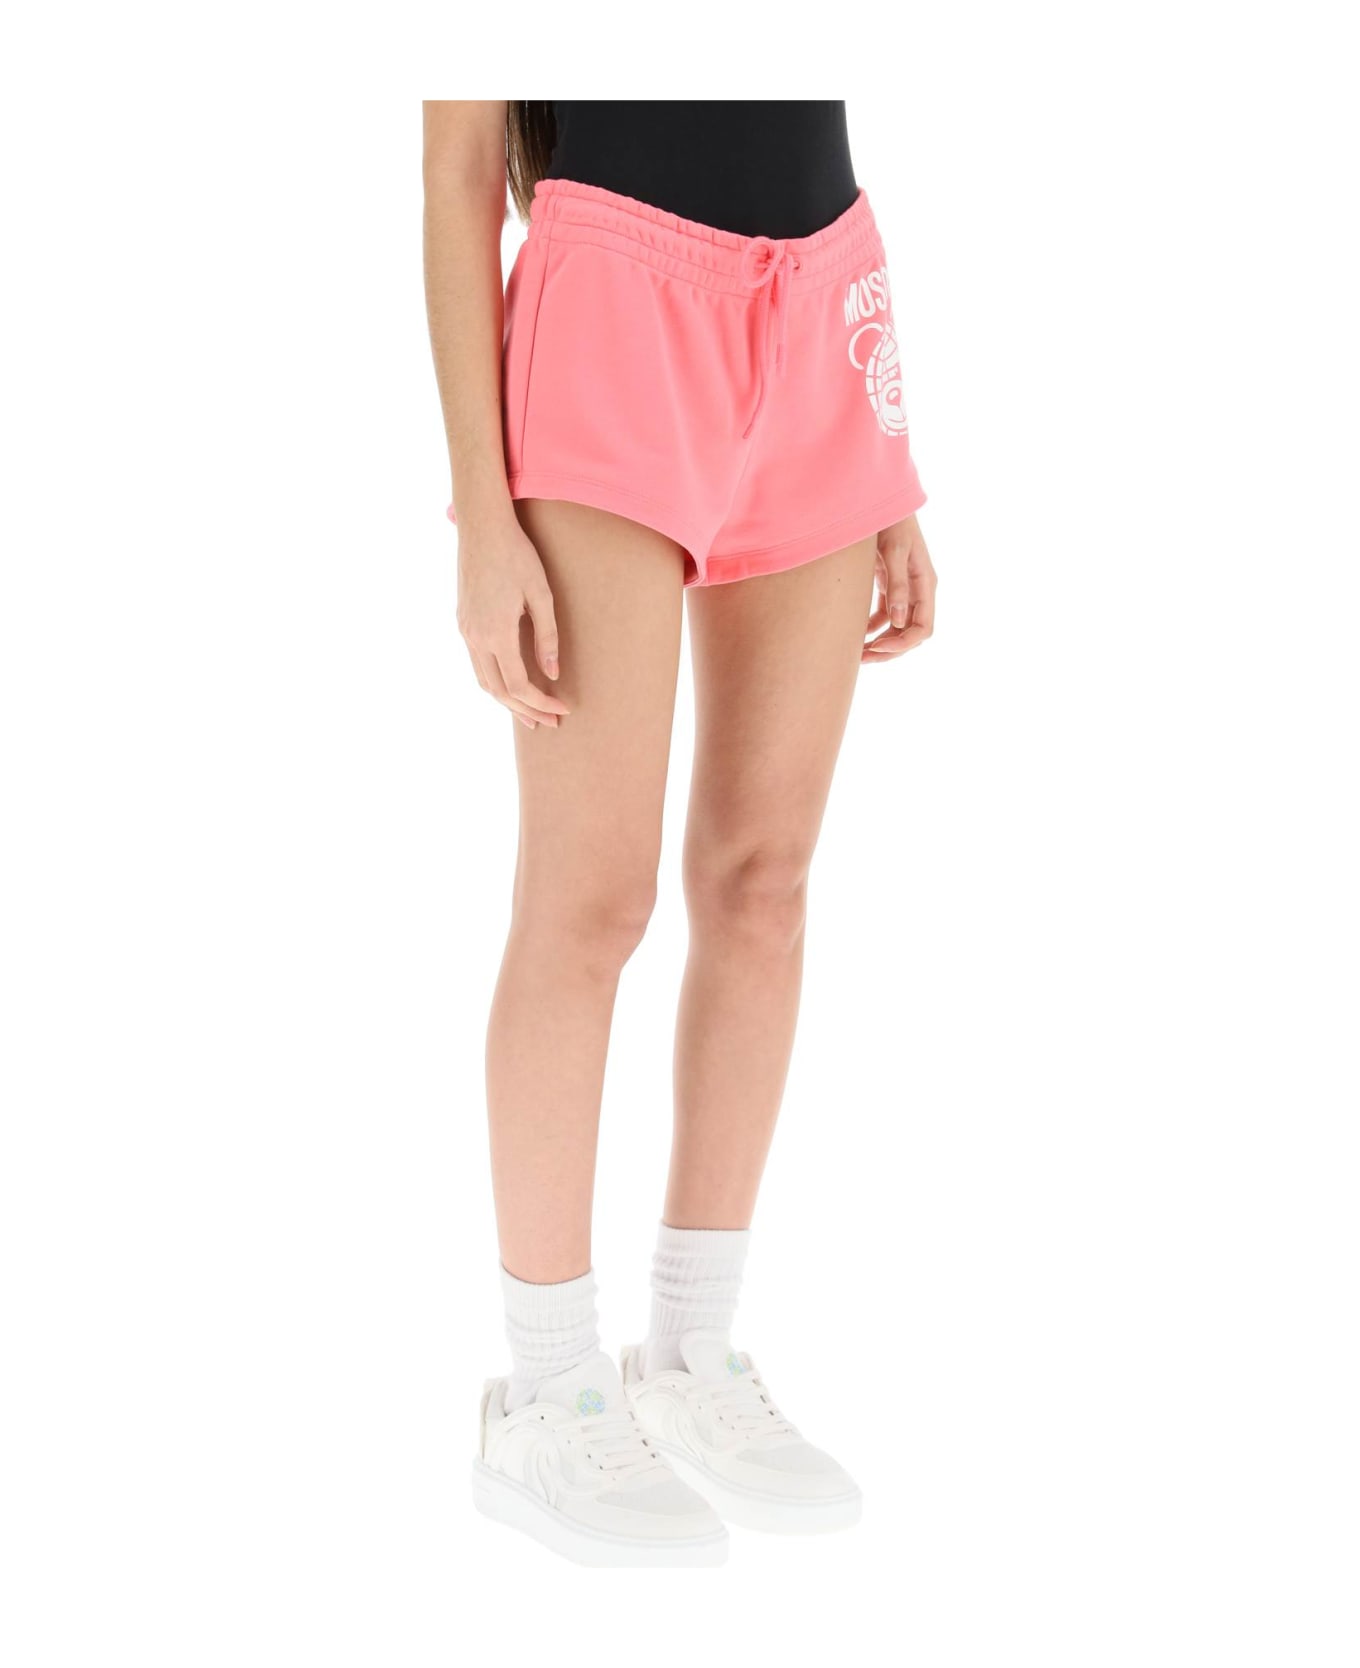 Moschino Sporty Shorts With Teddy Print - FANTASIA FUXIA (Pink)